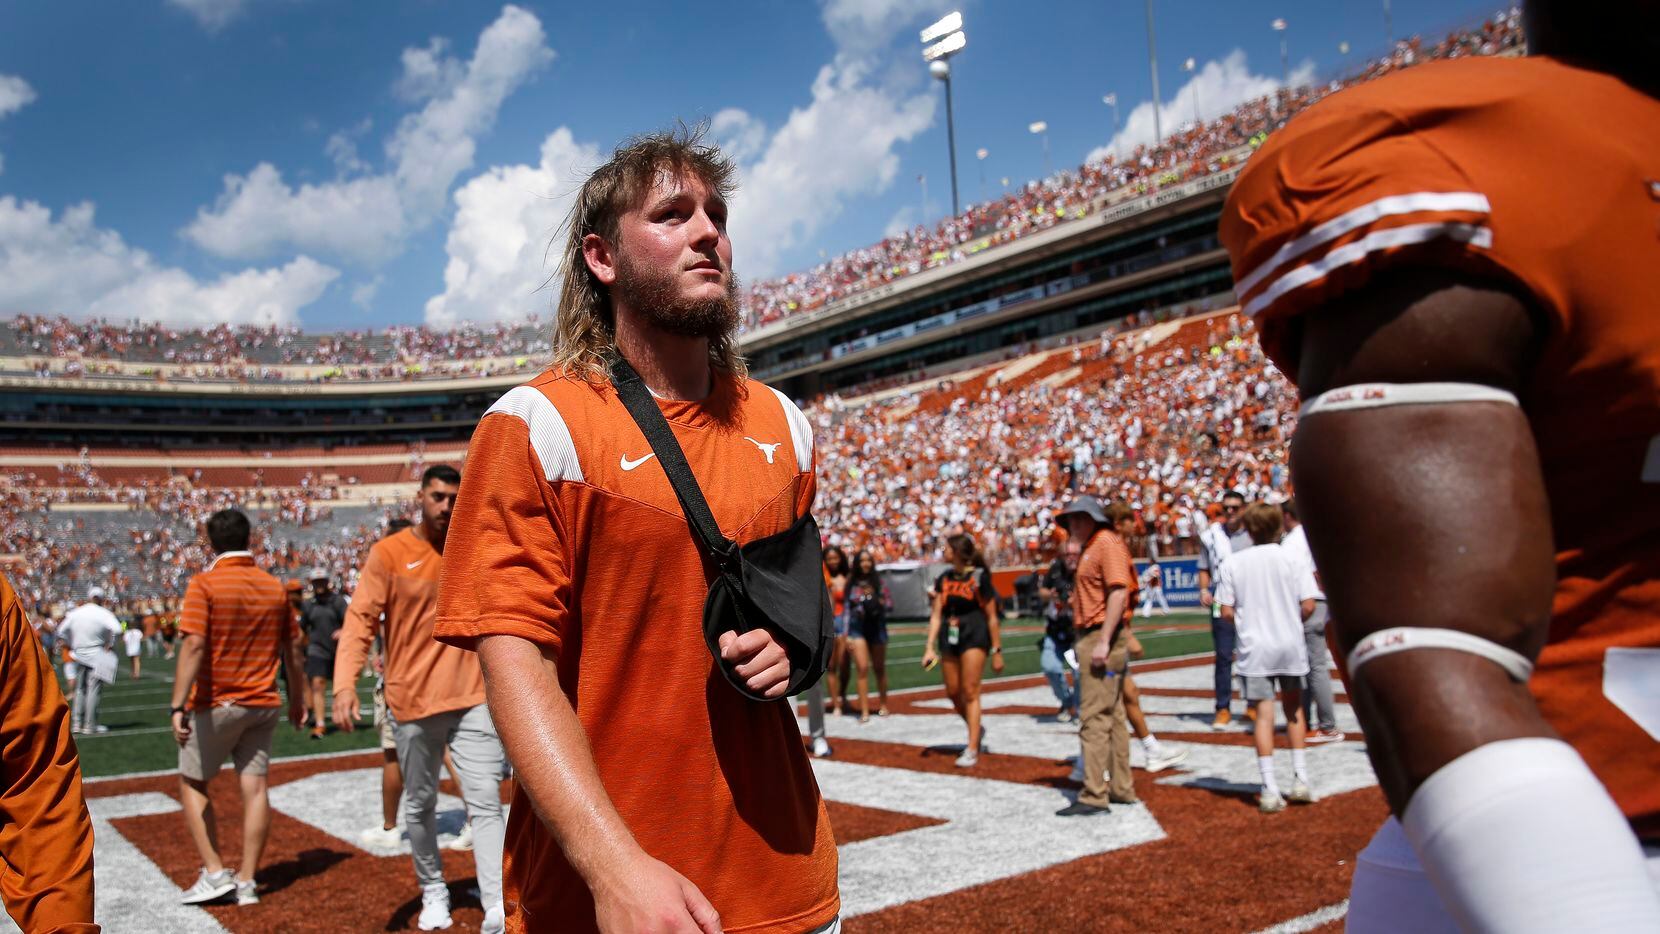 With his arm in a sling, Texas Longhorns quarterback Quinn Ewers walks off the field...